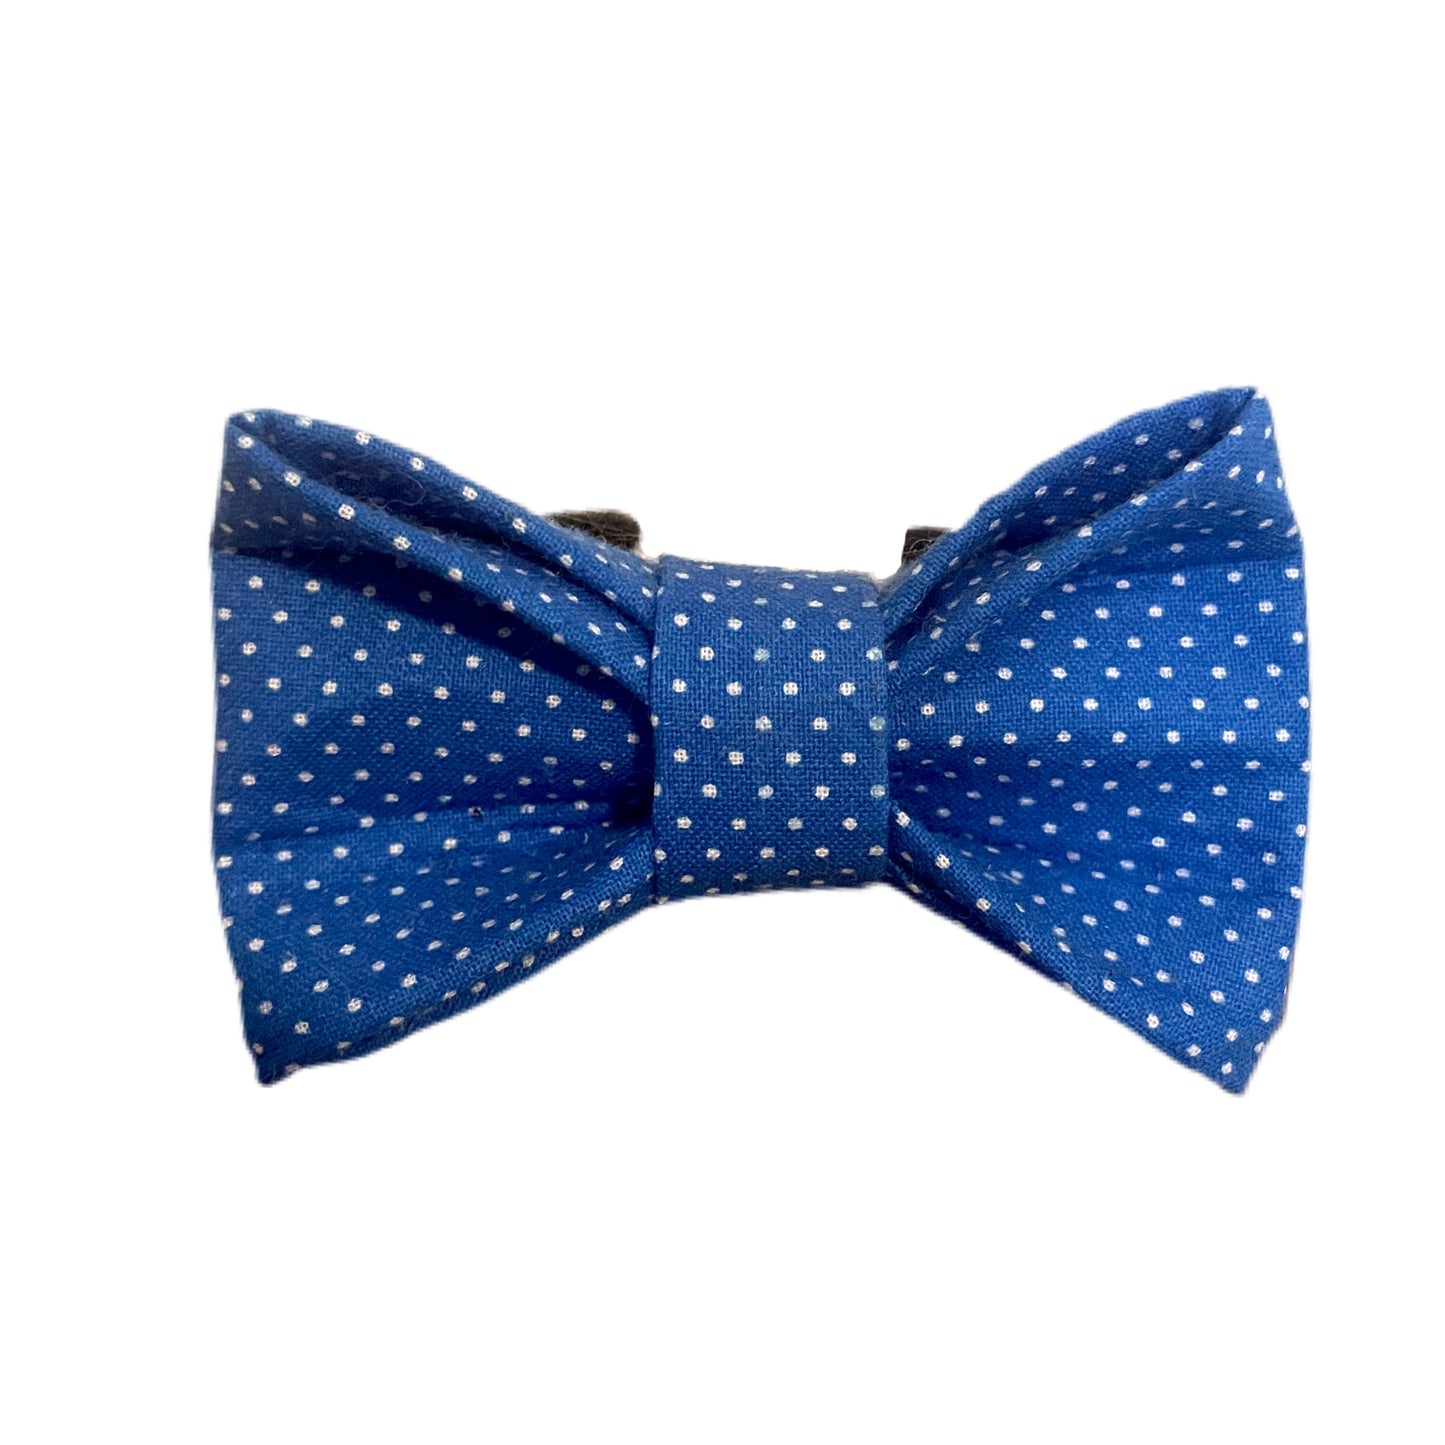 Blue Polka Dots Bow Tie (Size Small)